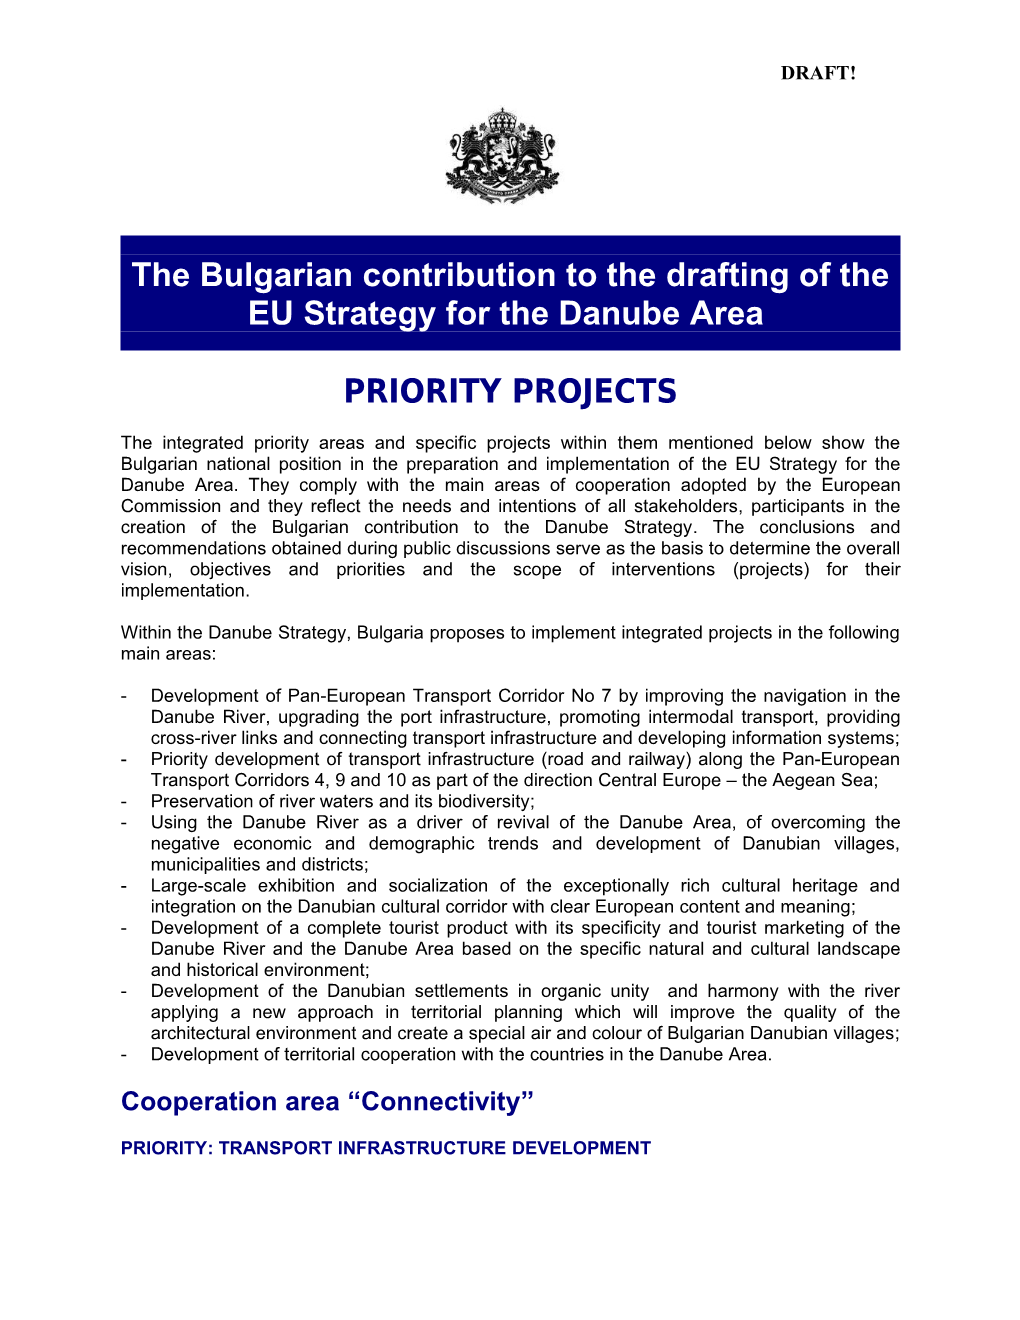 The Bulgarian Contribution to the Drafting of the EU Strategy for the Danube Area